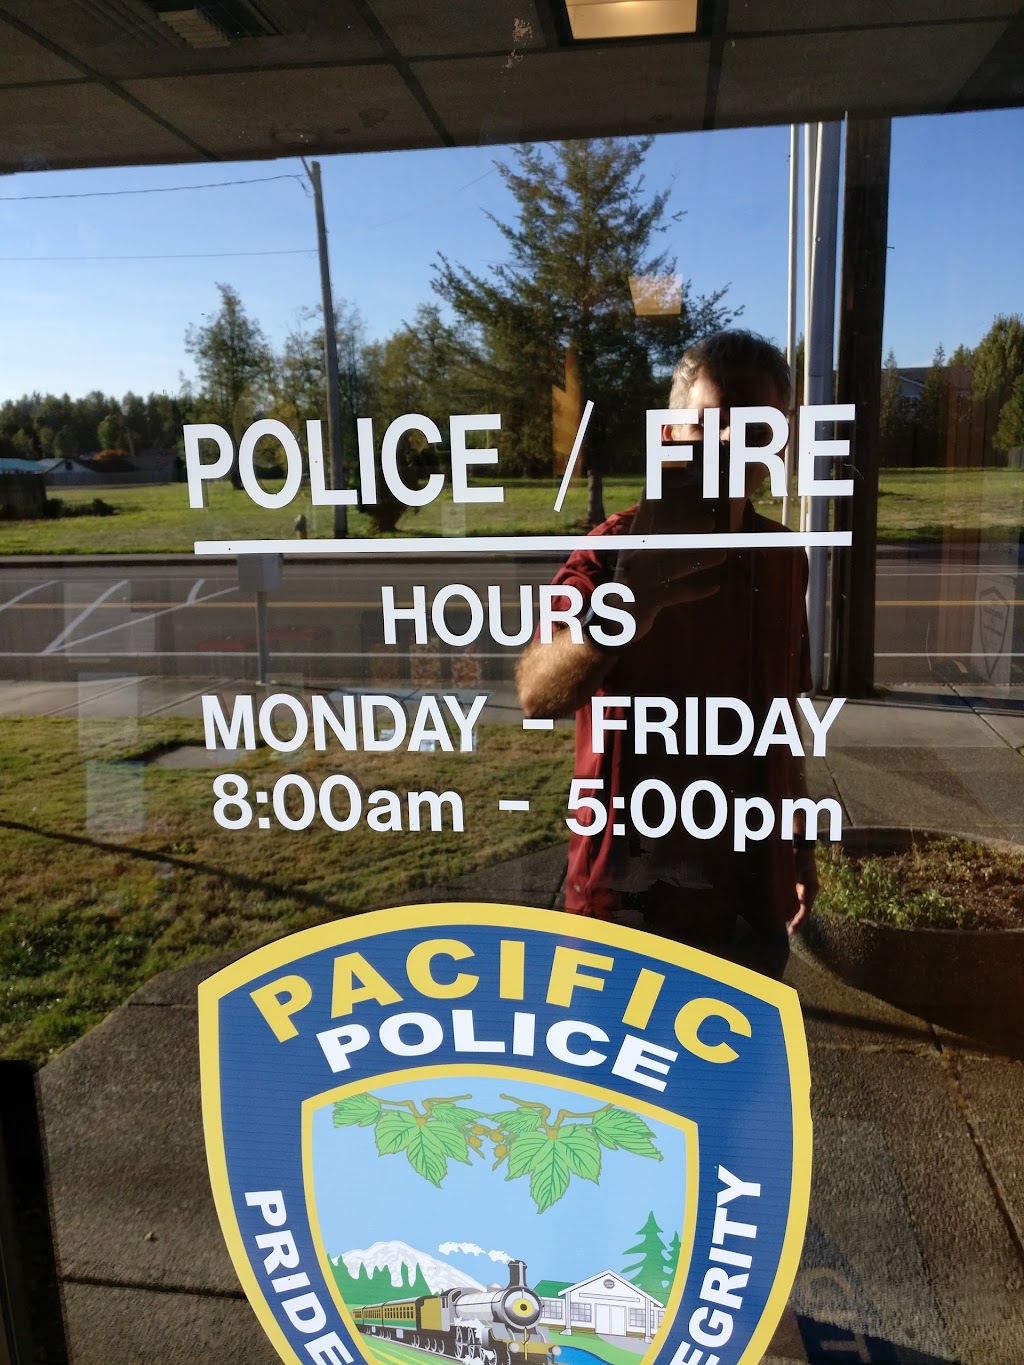 Pacific City Police Department | 133 3rd Ave SE, Pacific, WA 98047, USA | Phone: (253) 929-1130